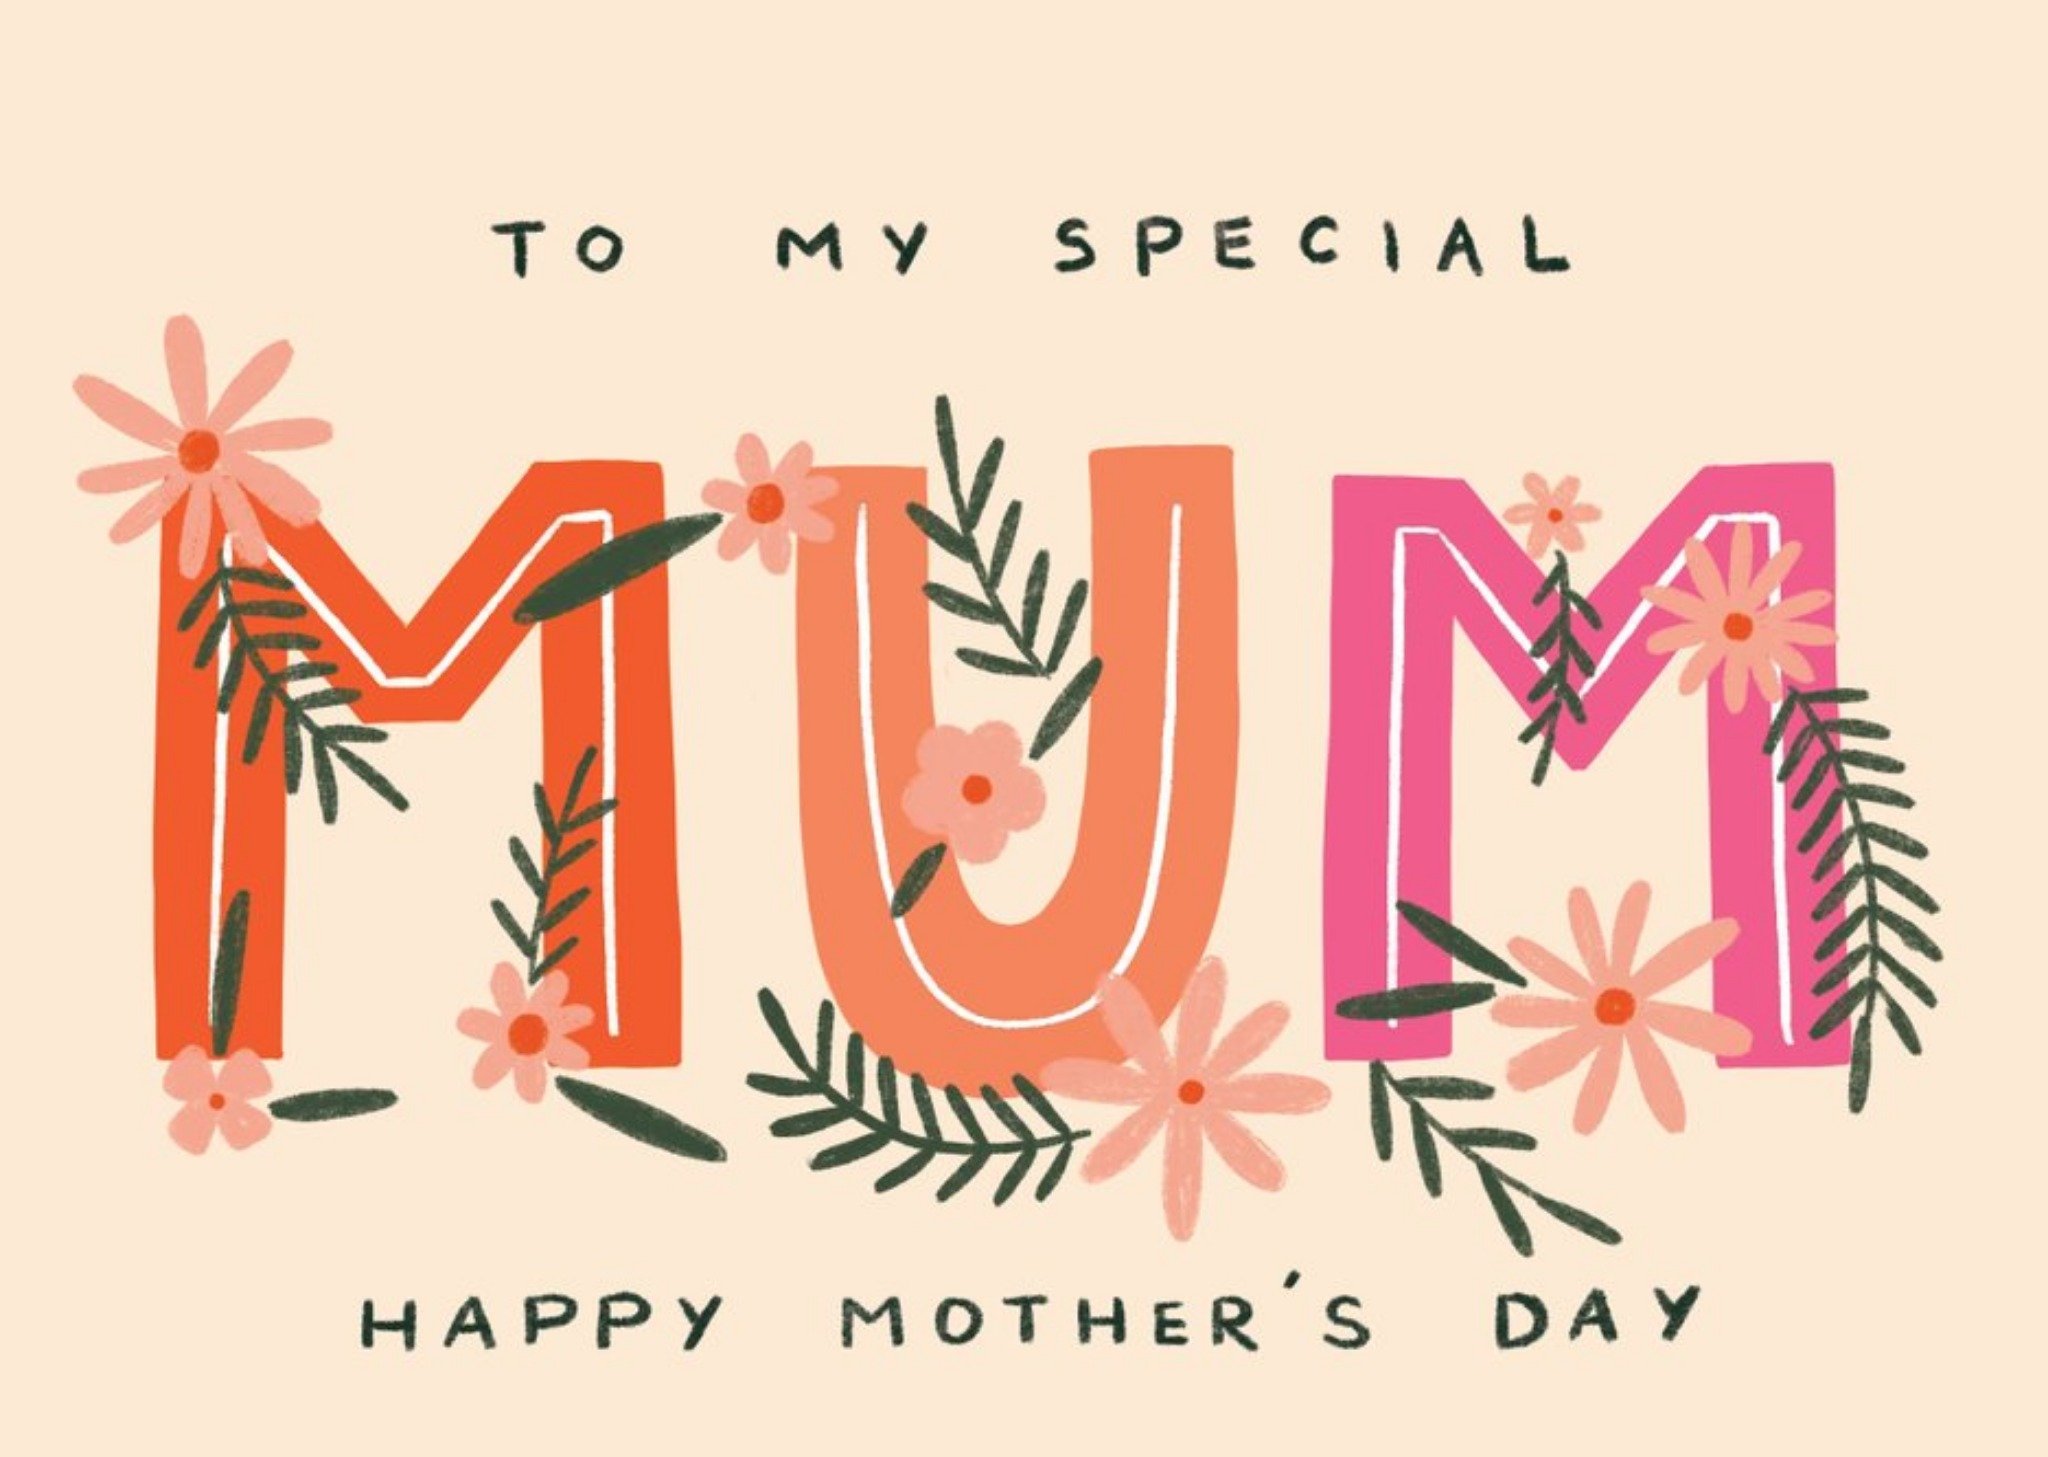 Moonpig To My Special Mum Happy Mother's Day Floral Typographic Card Ecard